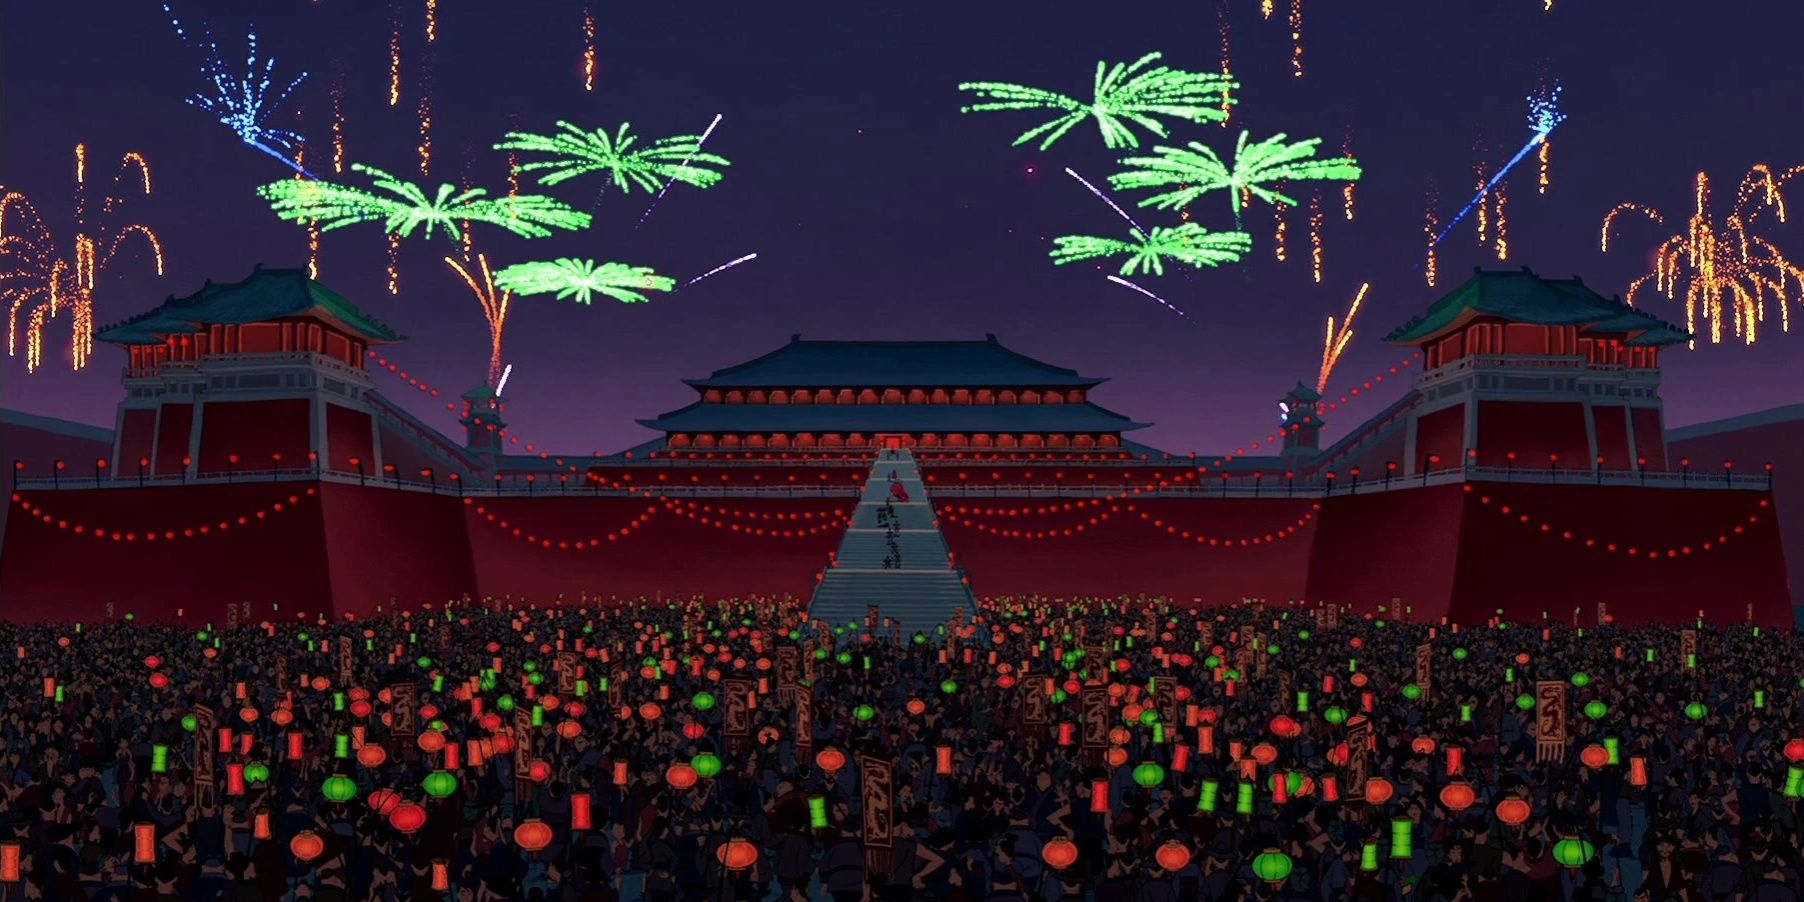 The Emperors Palace in Mulan